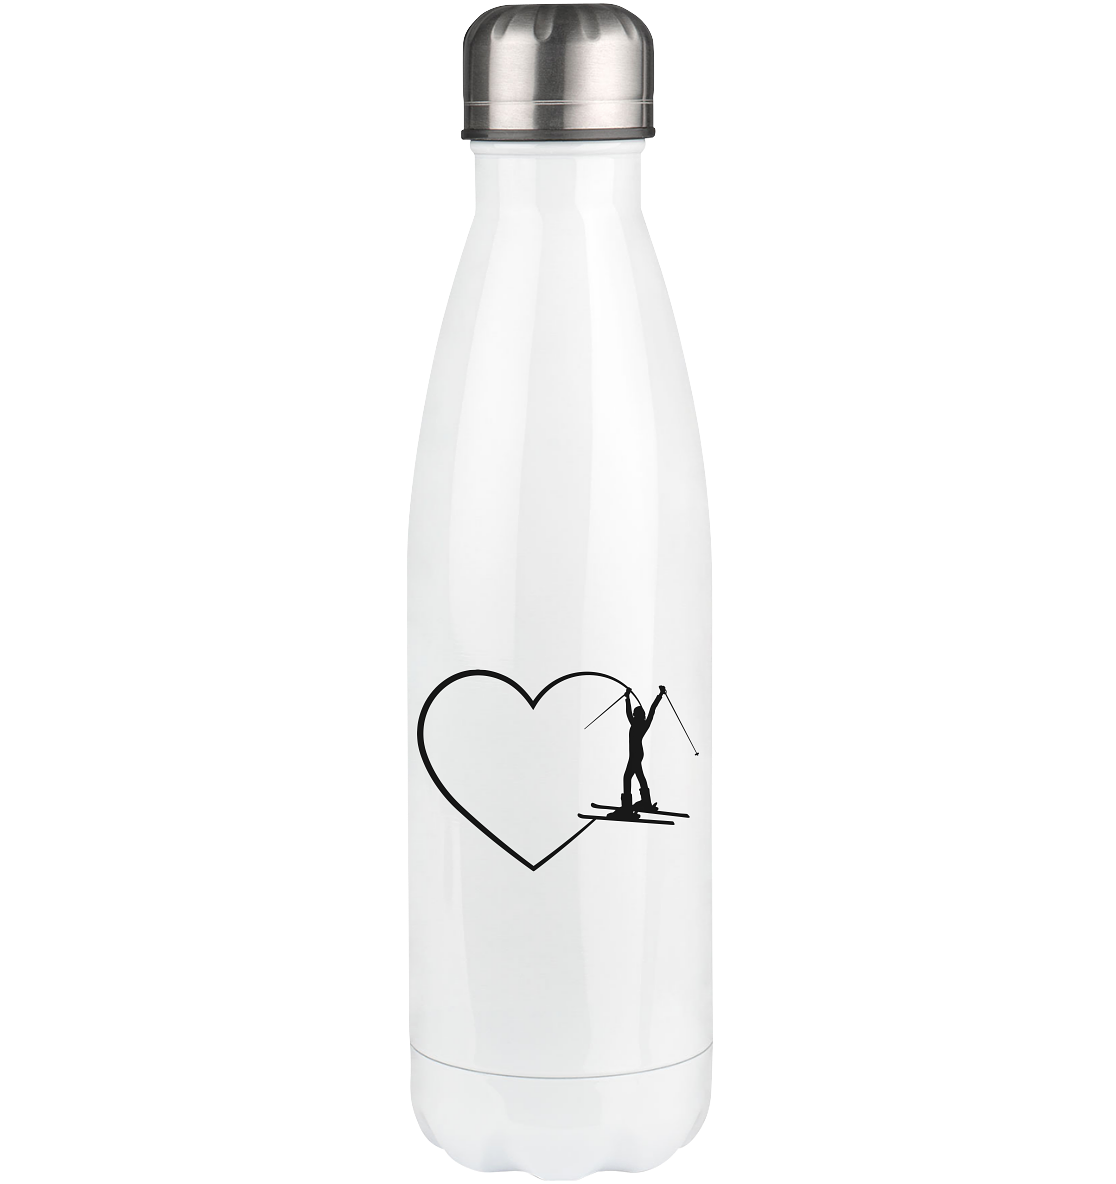 Heart 2 and Skiing - Edelstahl Thermosflasche klettern ski 500ml